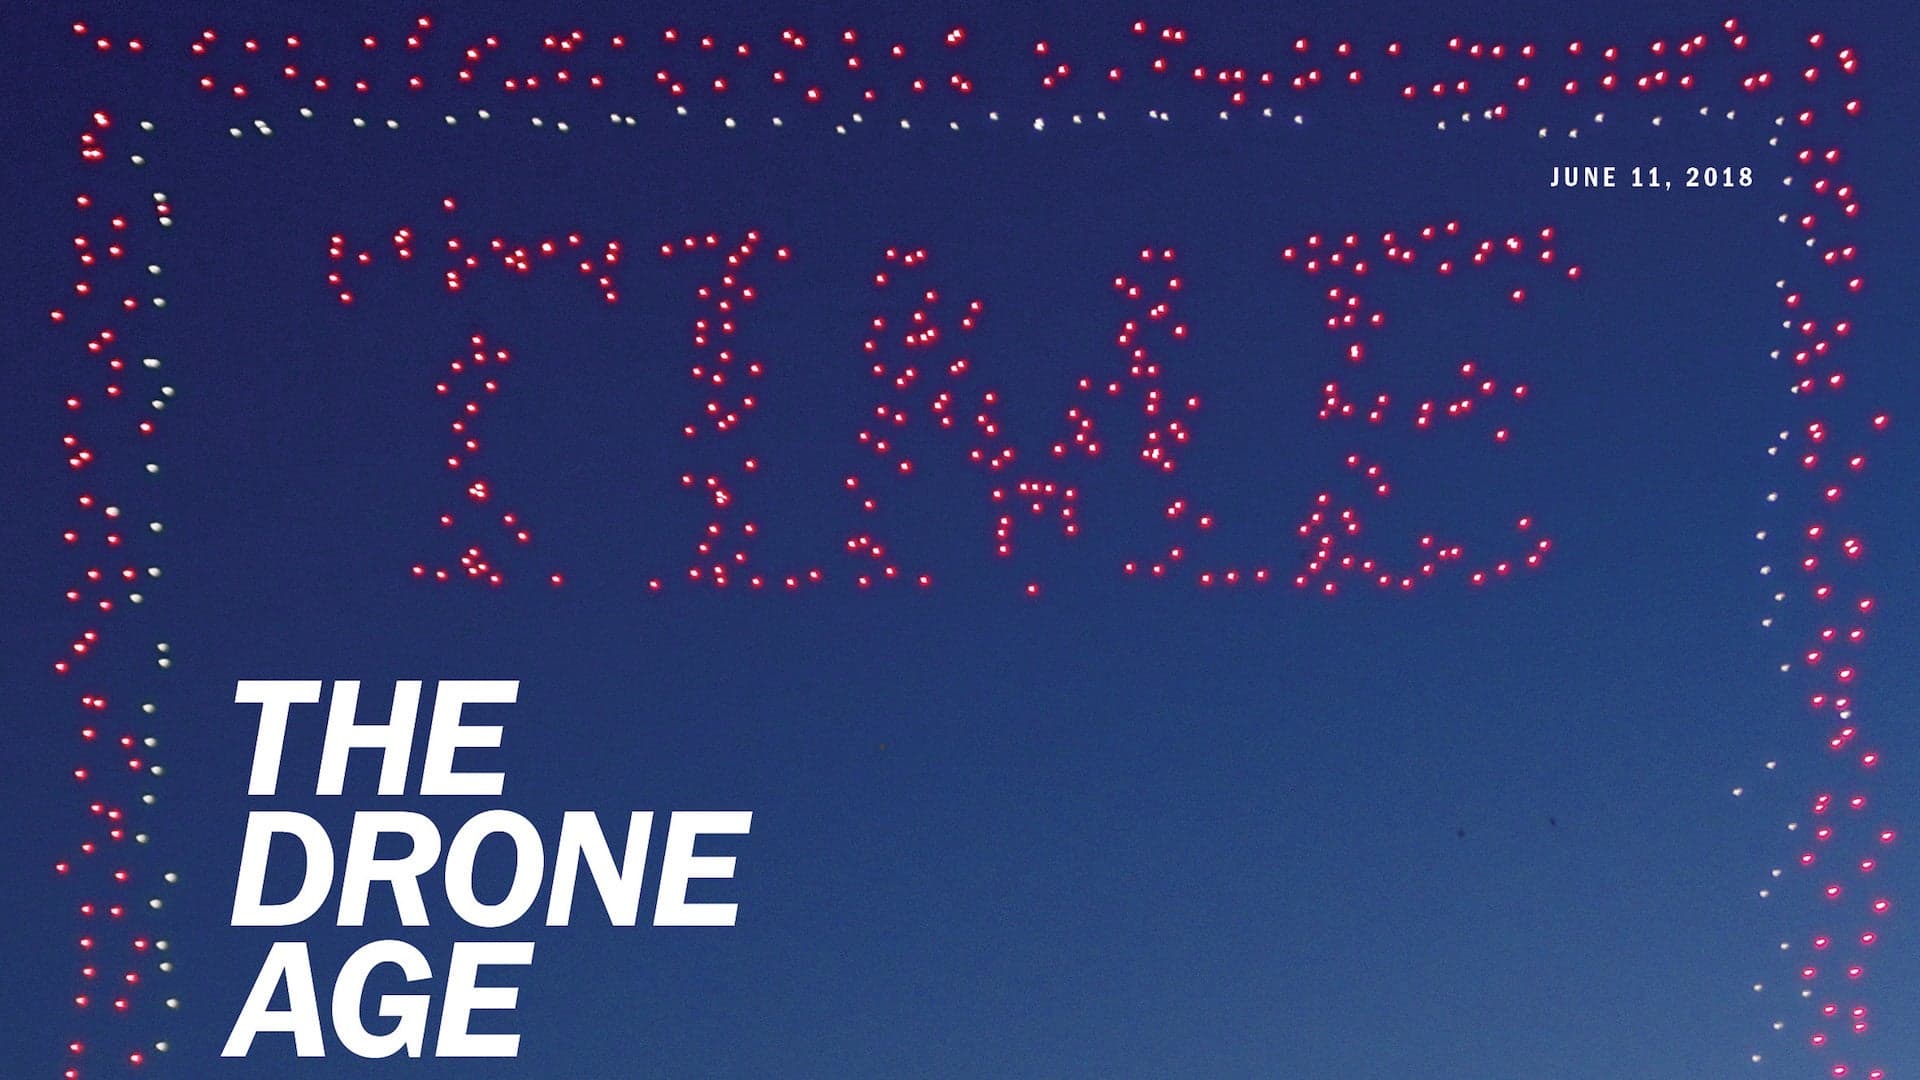 TIME Magazine’s Drone Issue and the 958 UAVs That Created Its Cover